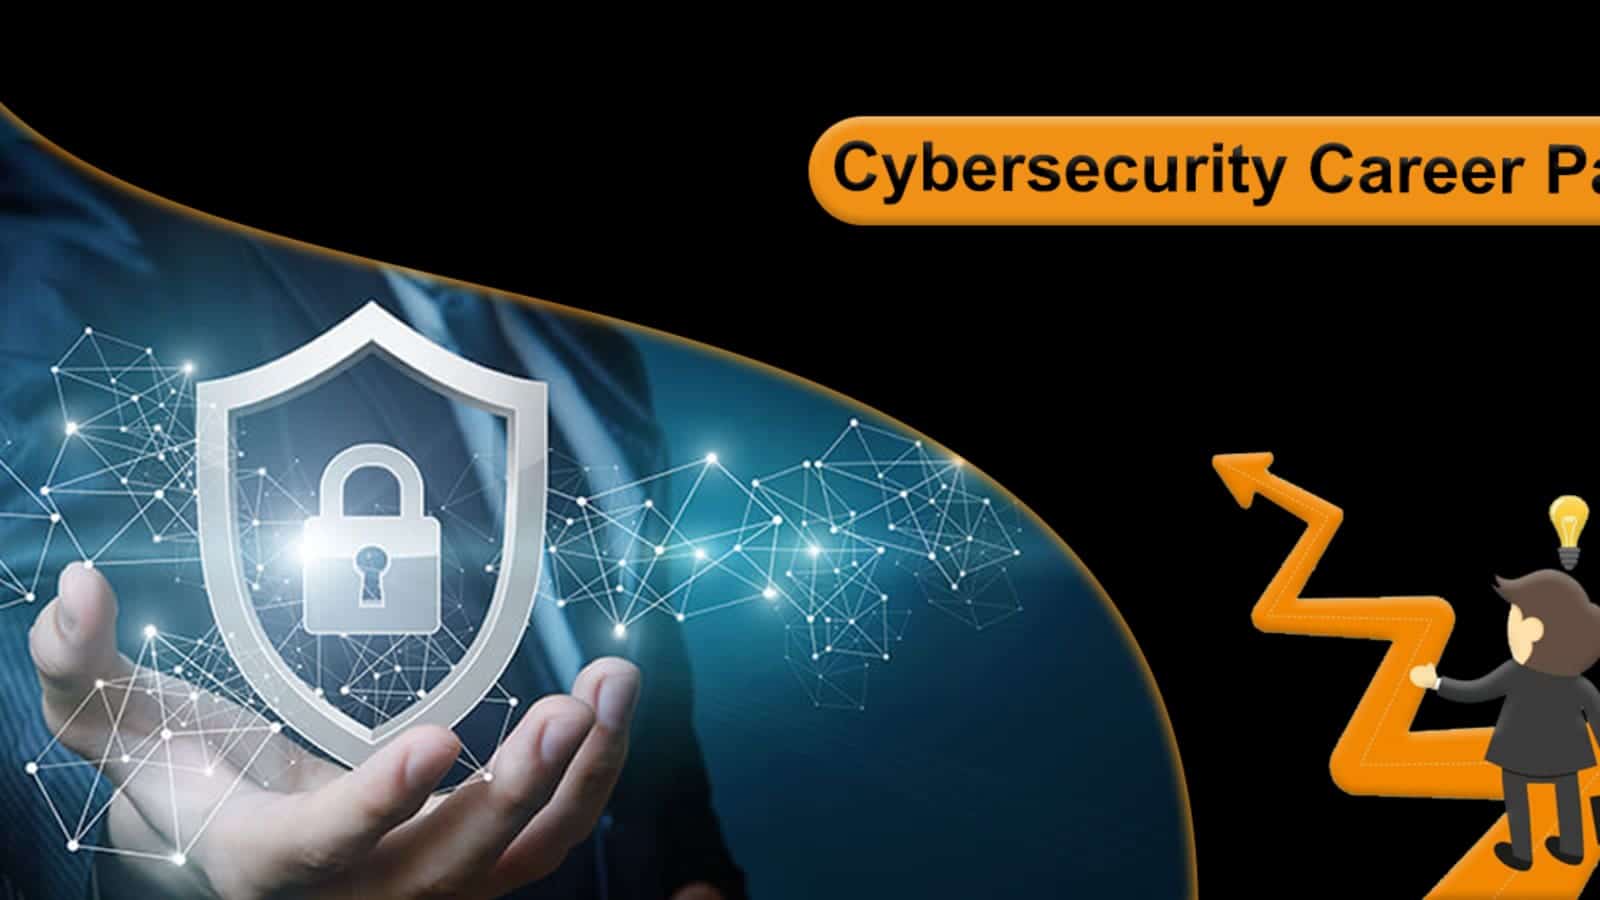 How to start a career in Cyber Security?